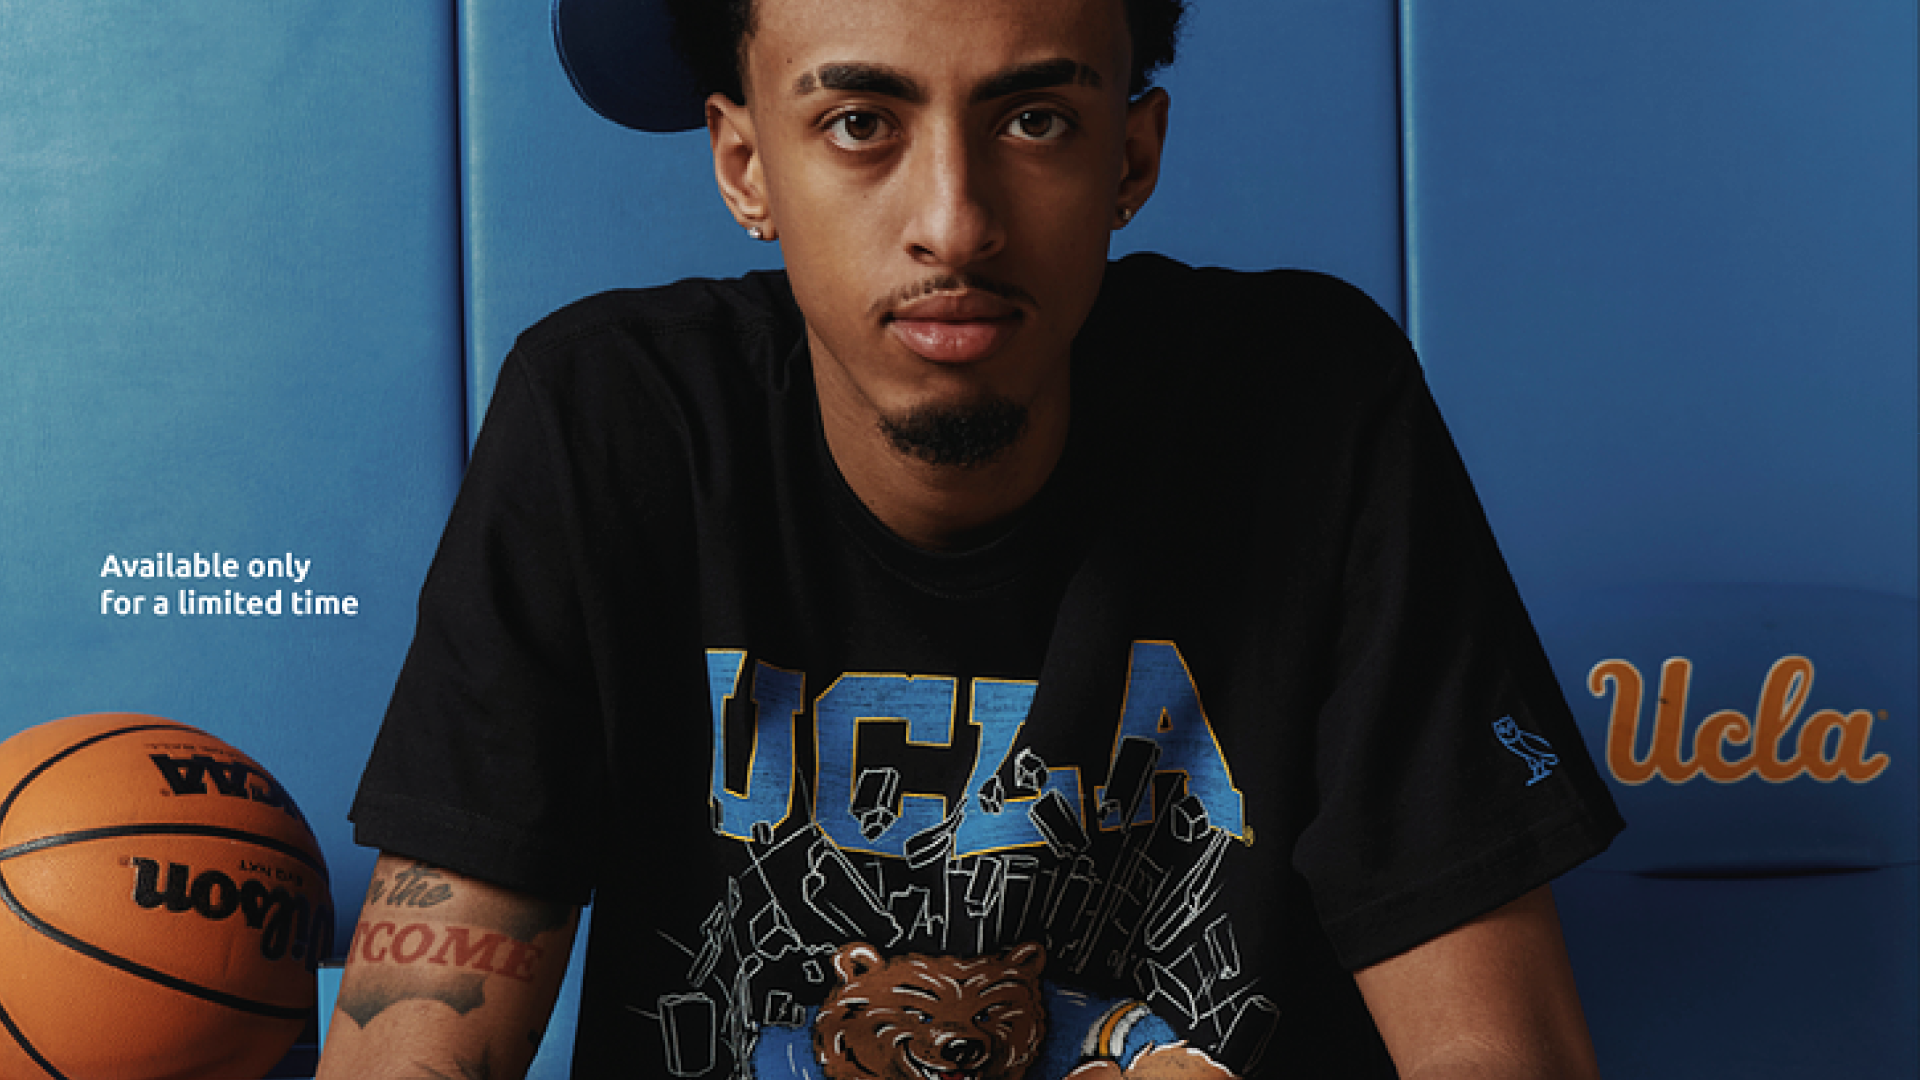 October's Very Own Brings Limited UCLA Collection to UCLA Store